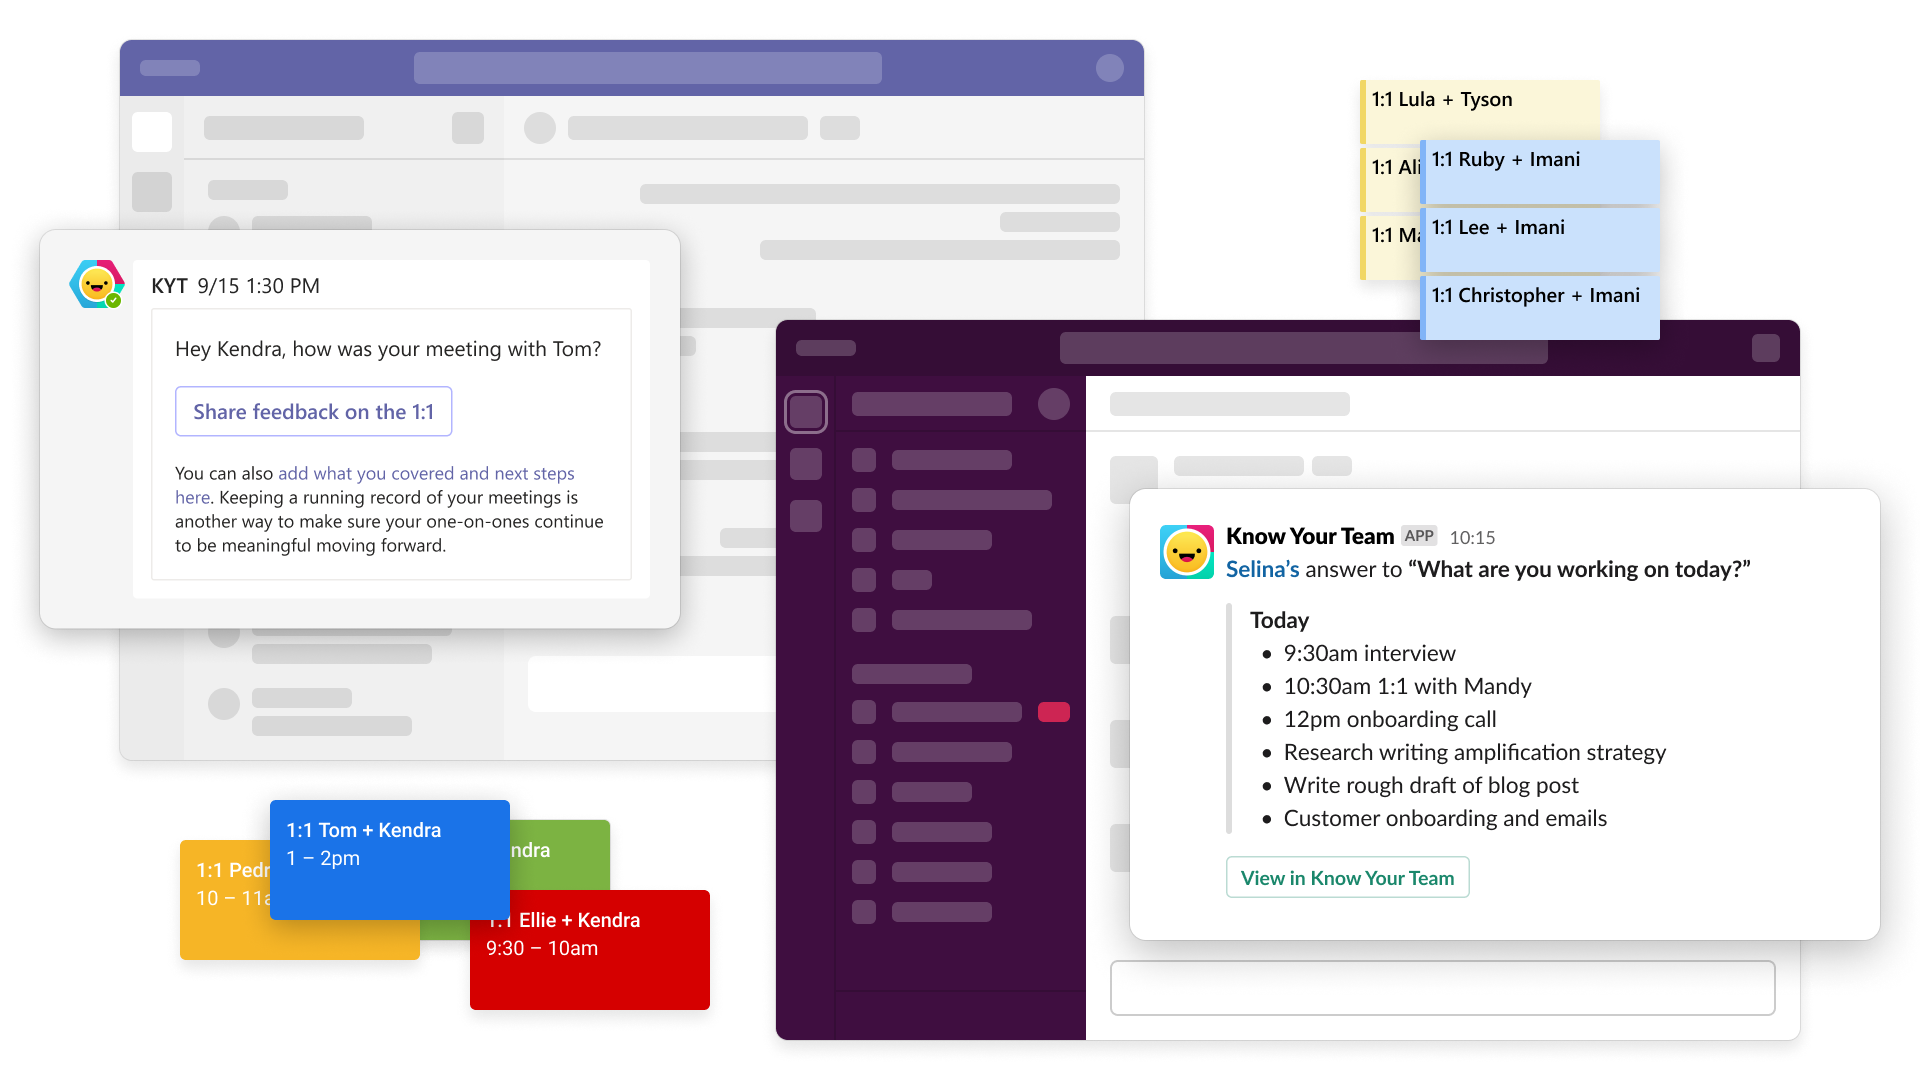 A collection of example screenshots and imagery from Slack, Microsoft Teams, Google Calendar, and  Outlook